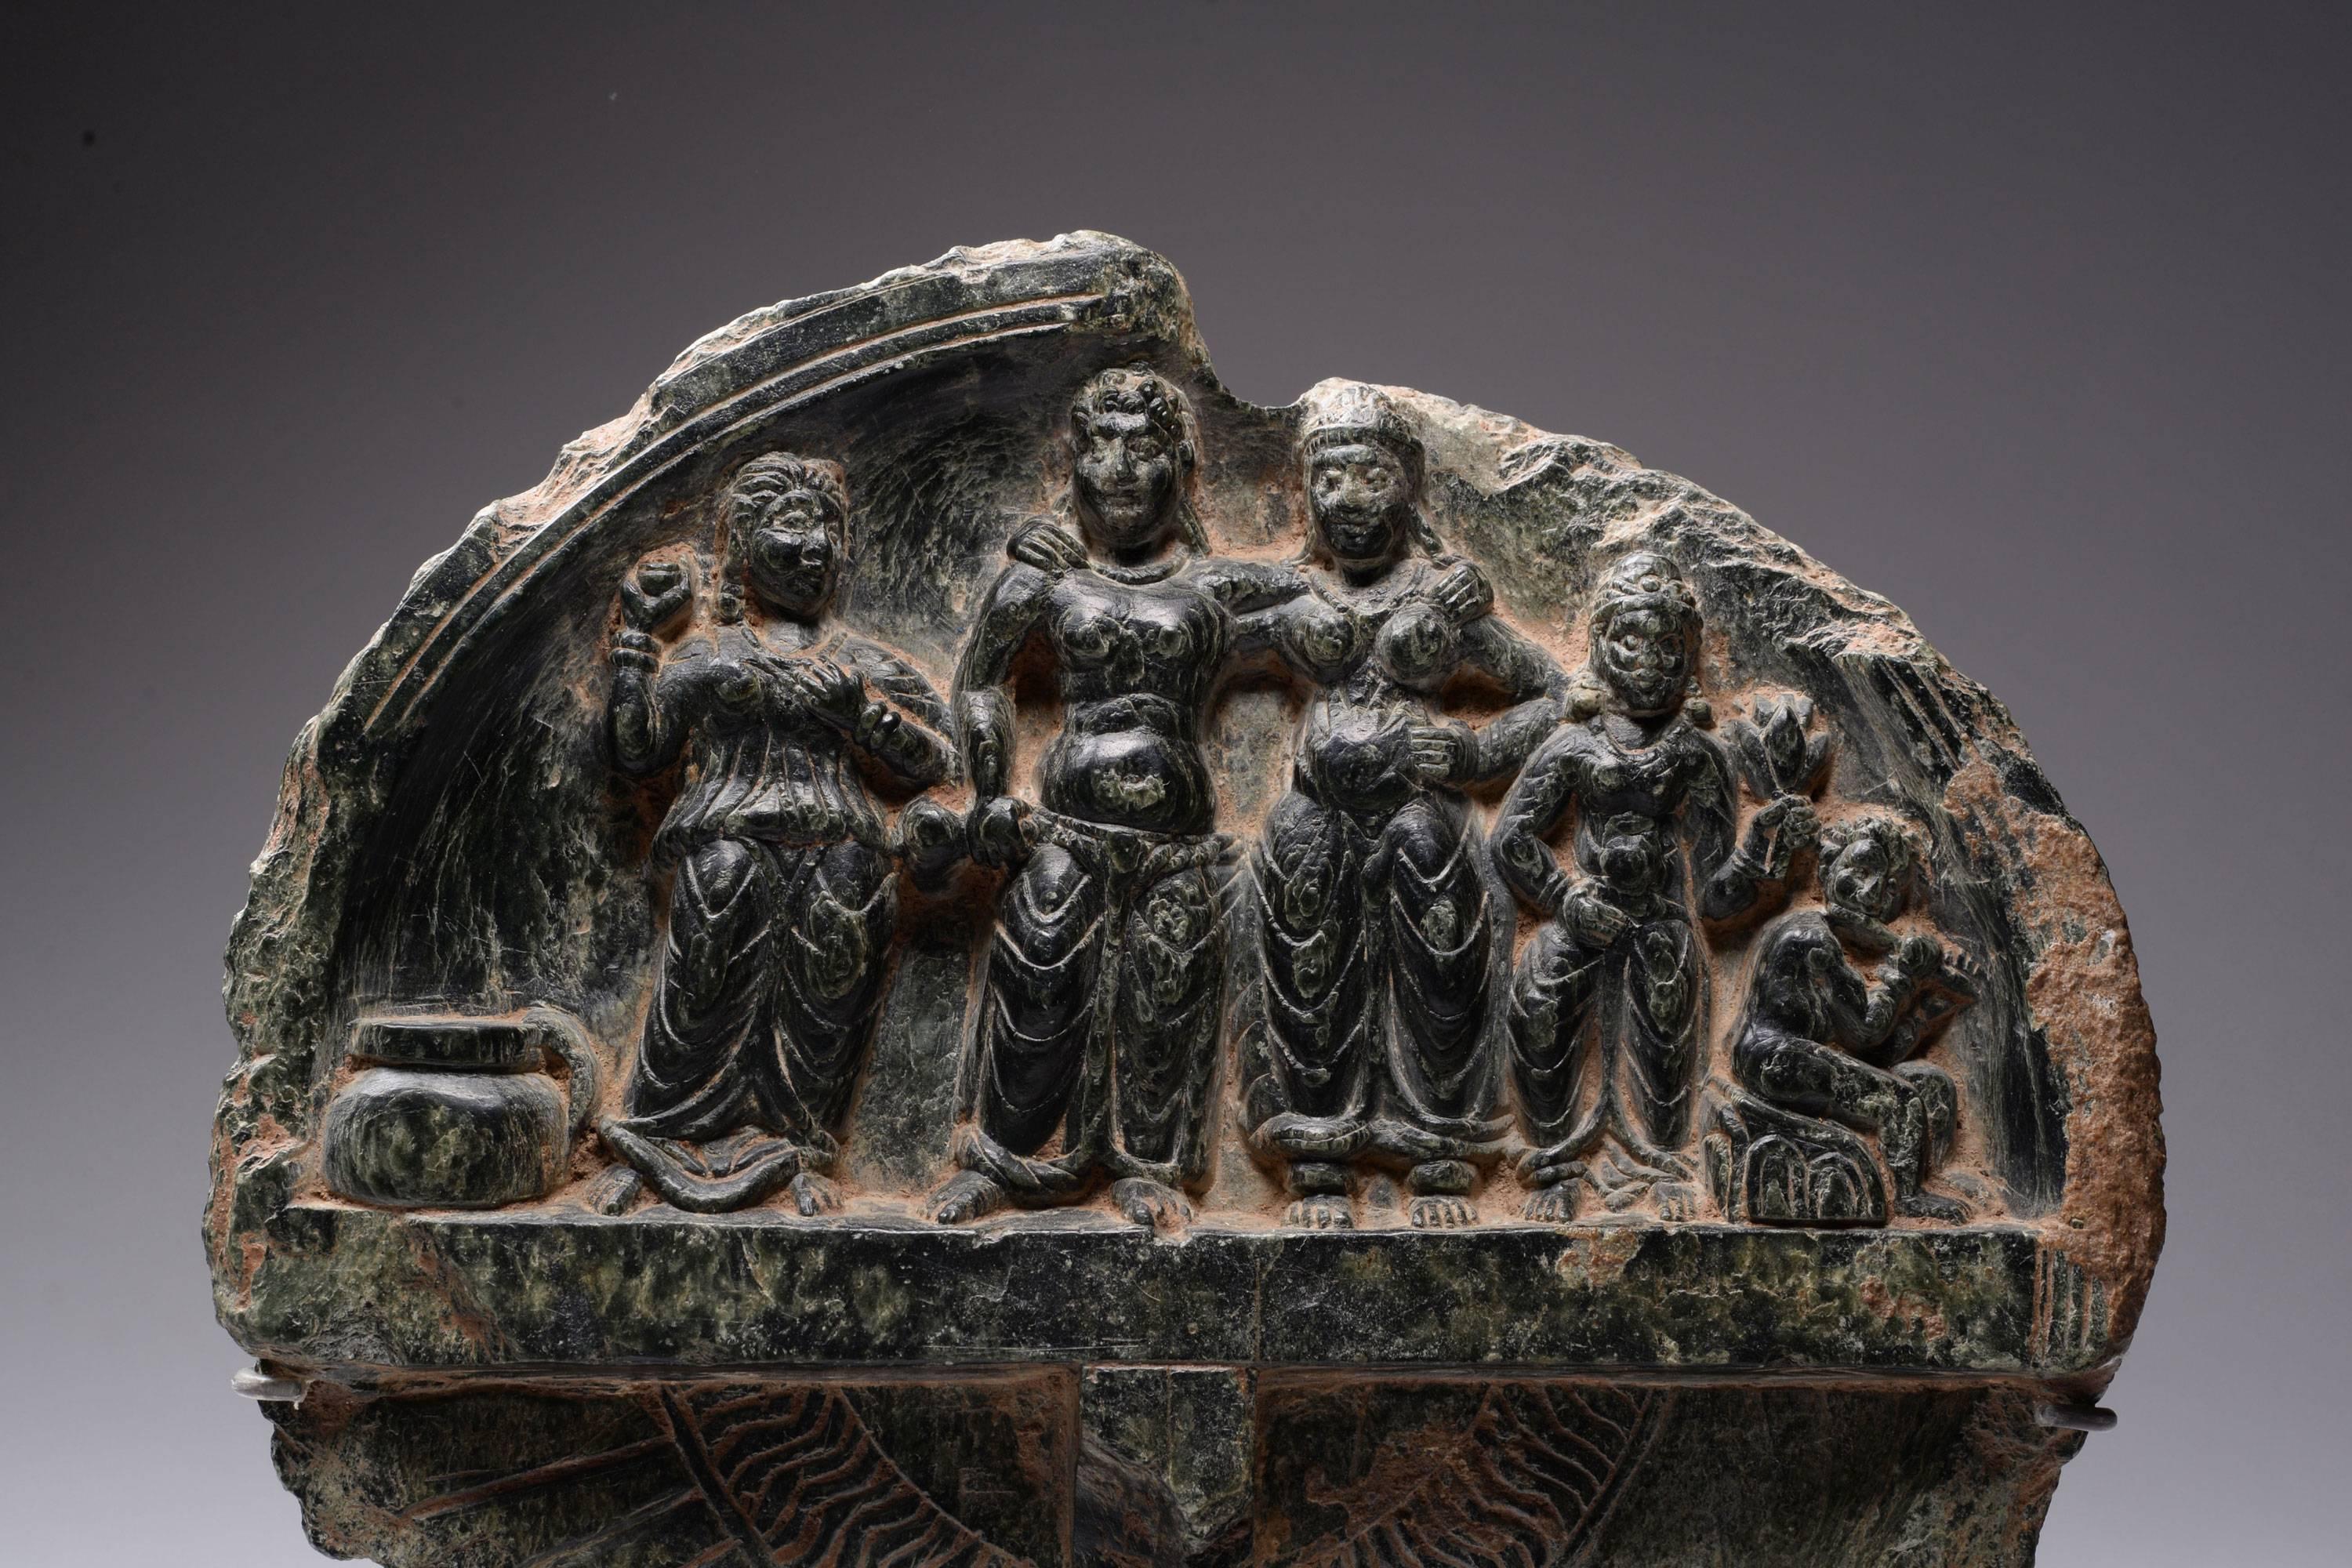 An exceptional Gandharan green schist dish or cosmetic palette, dating to the 2st - 3rd Century A.D. 

The stone of an unusual emerald / jade-like quality, polished to create a beautiful aesthetic. The piece is in the form of a large dish, divided